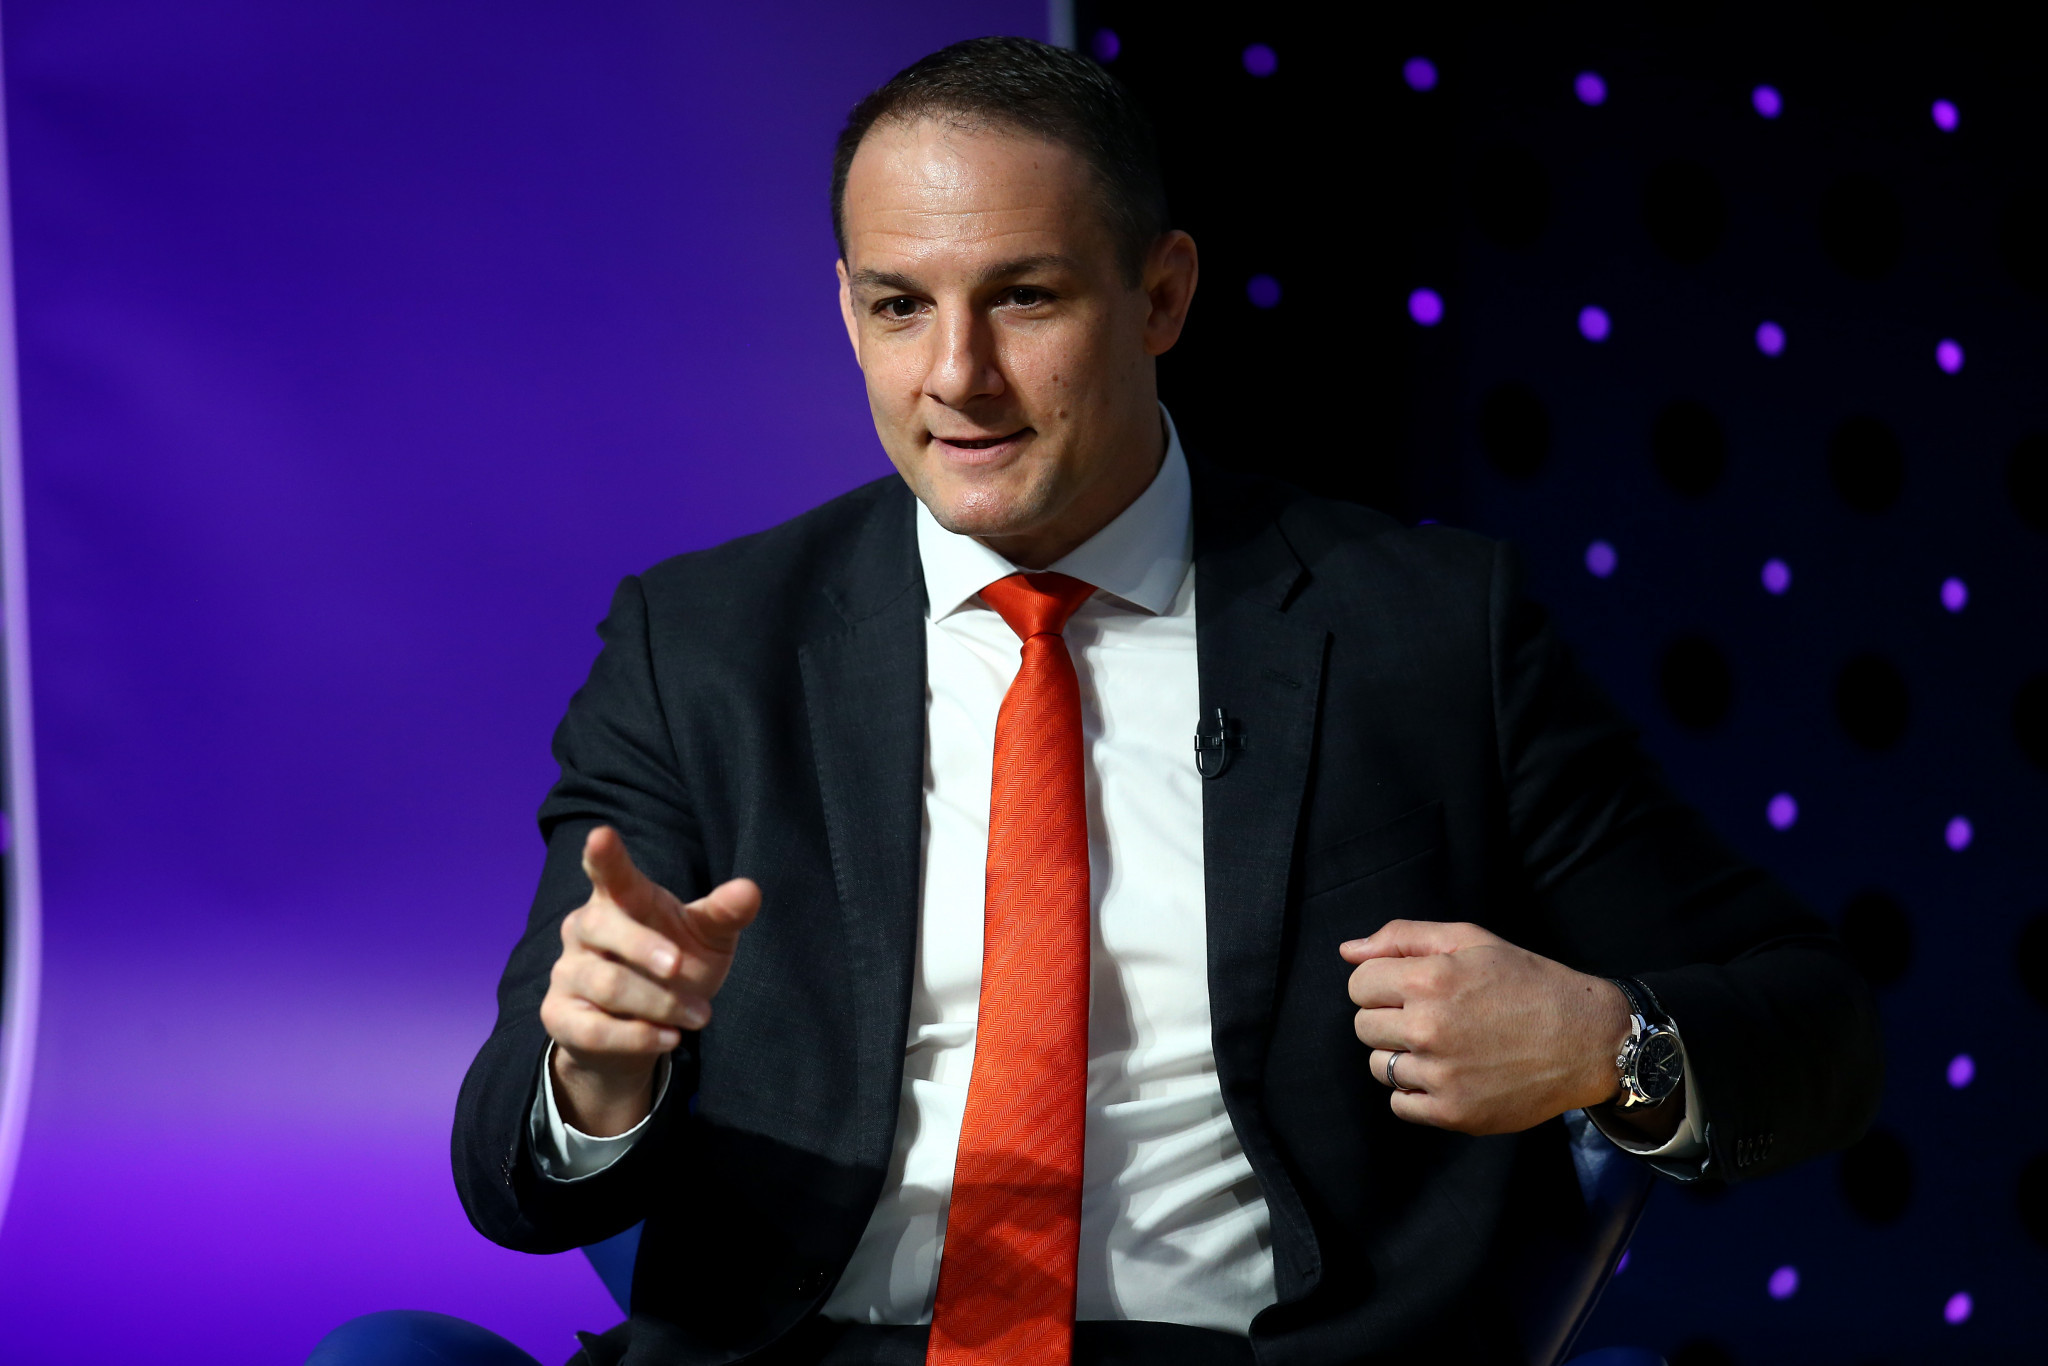 CGF chief executive David Grevemberg claims the organisation are taking a partnership approach to bidding ©Getty Images